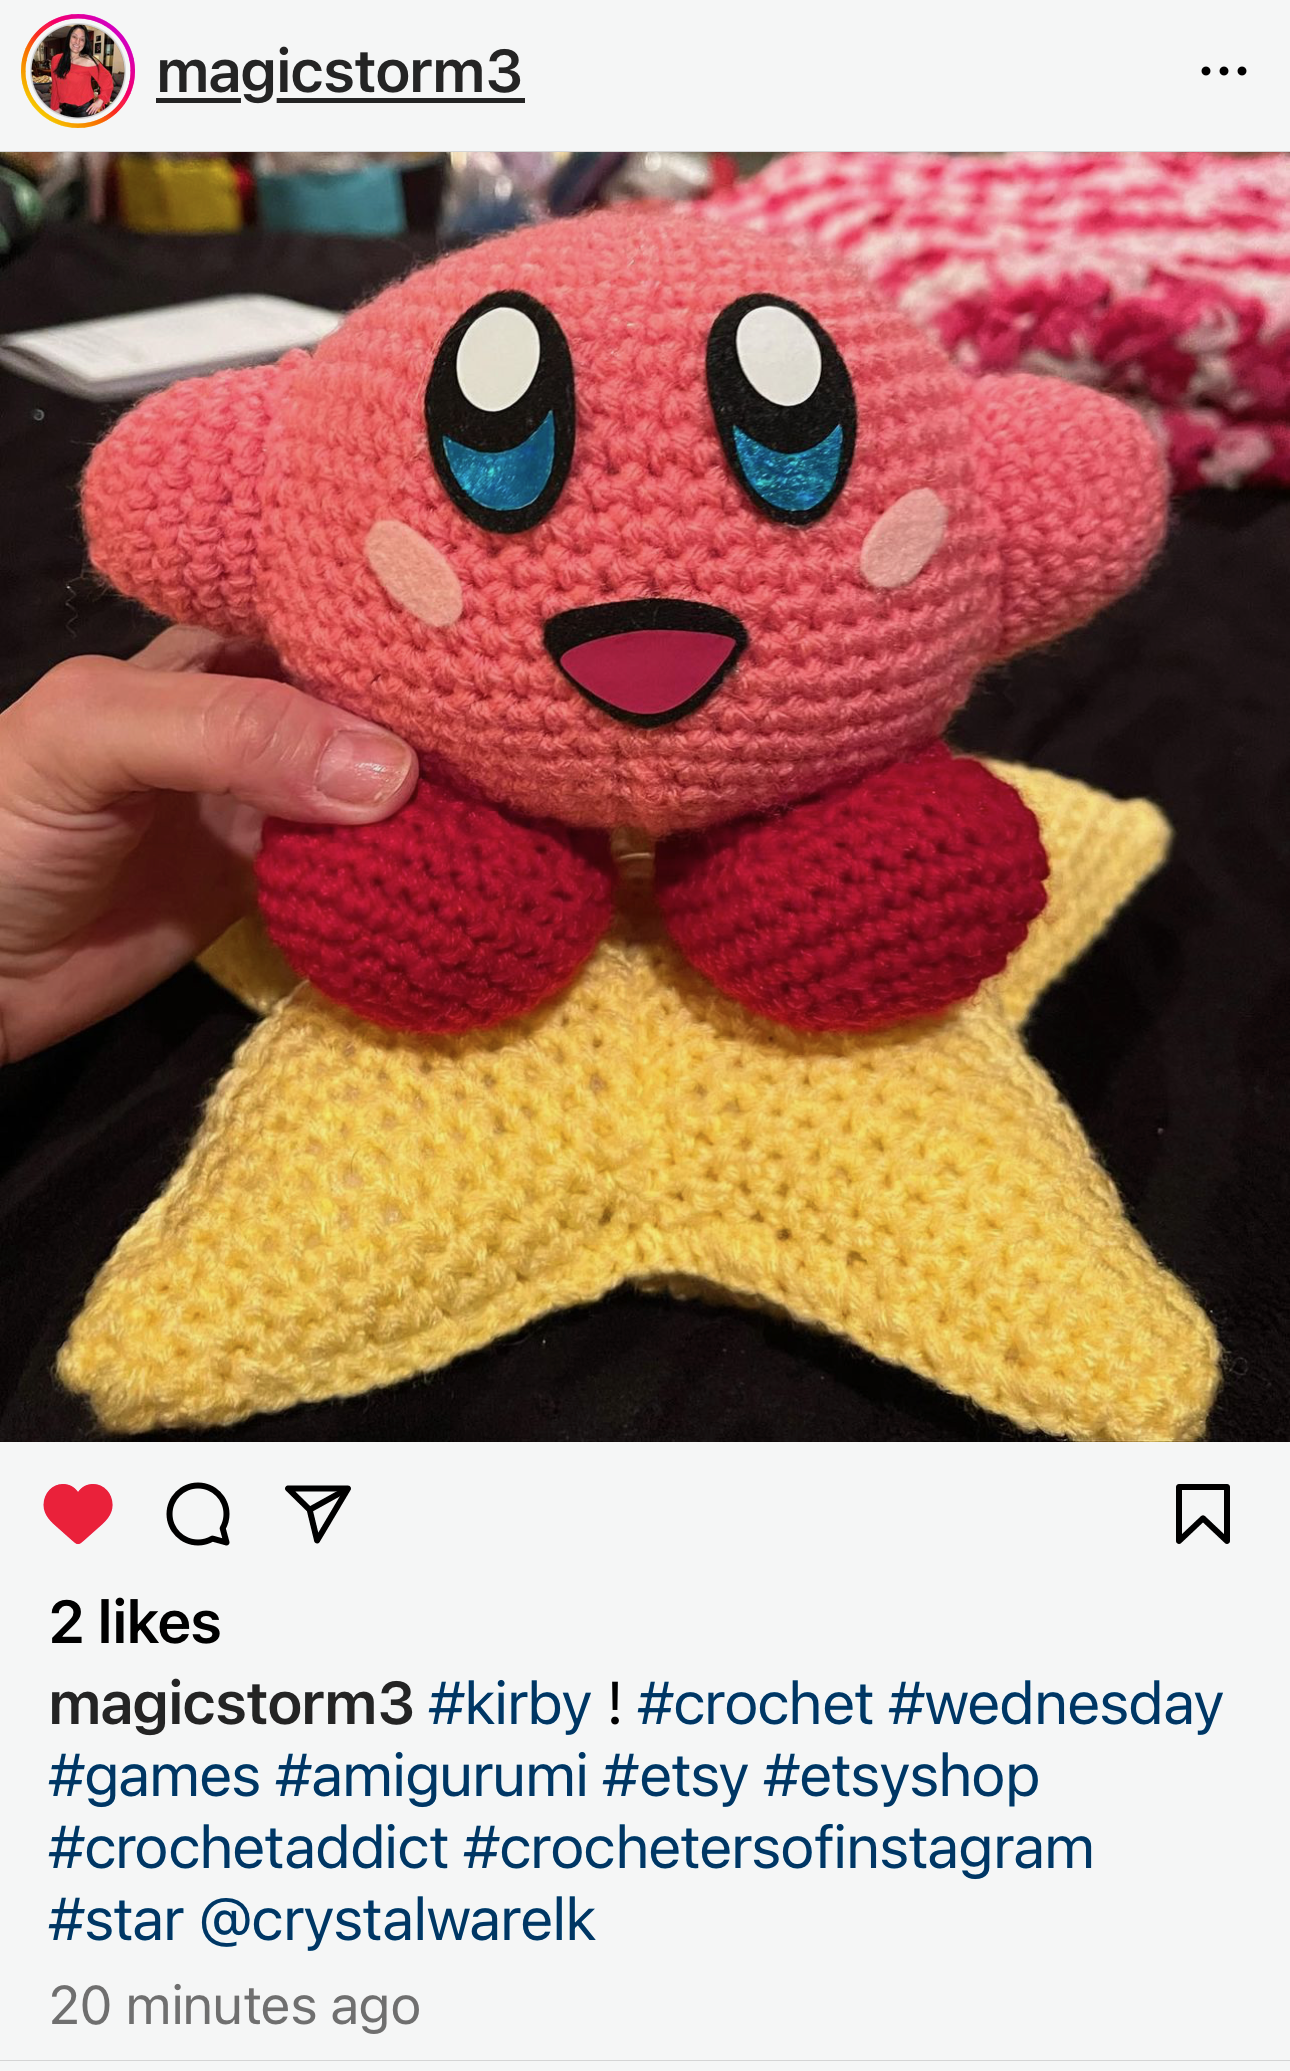 Photo of customer's instagram post showing crocheted Kirby doll using the Kirby Felt Face that we offer including eyes, mouth and cheeks